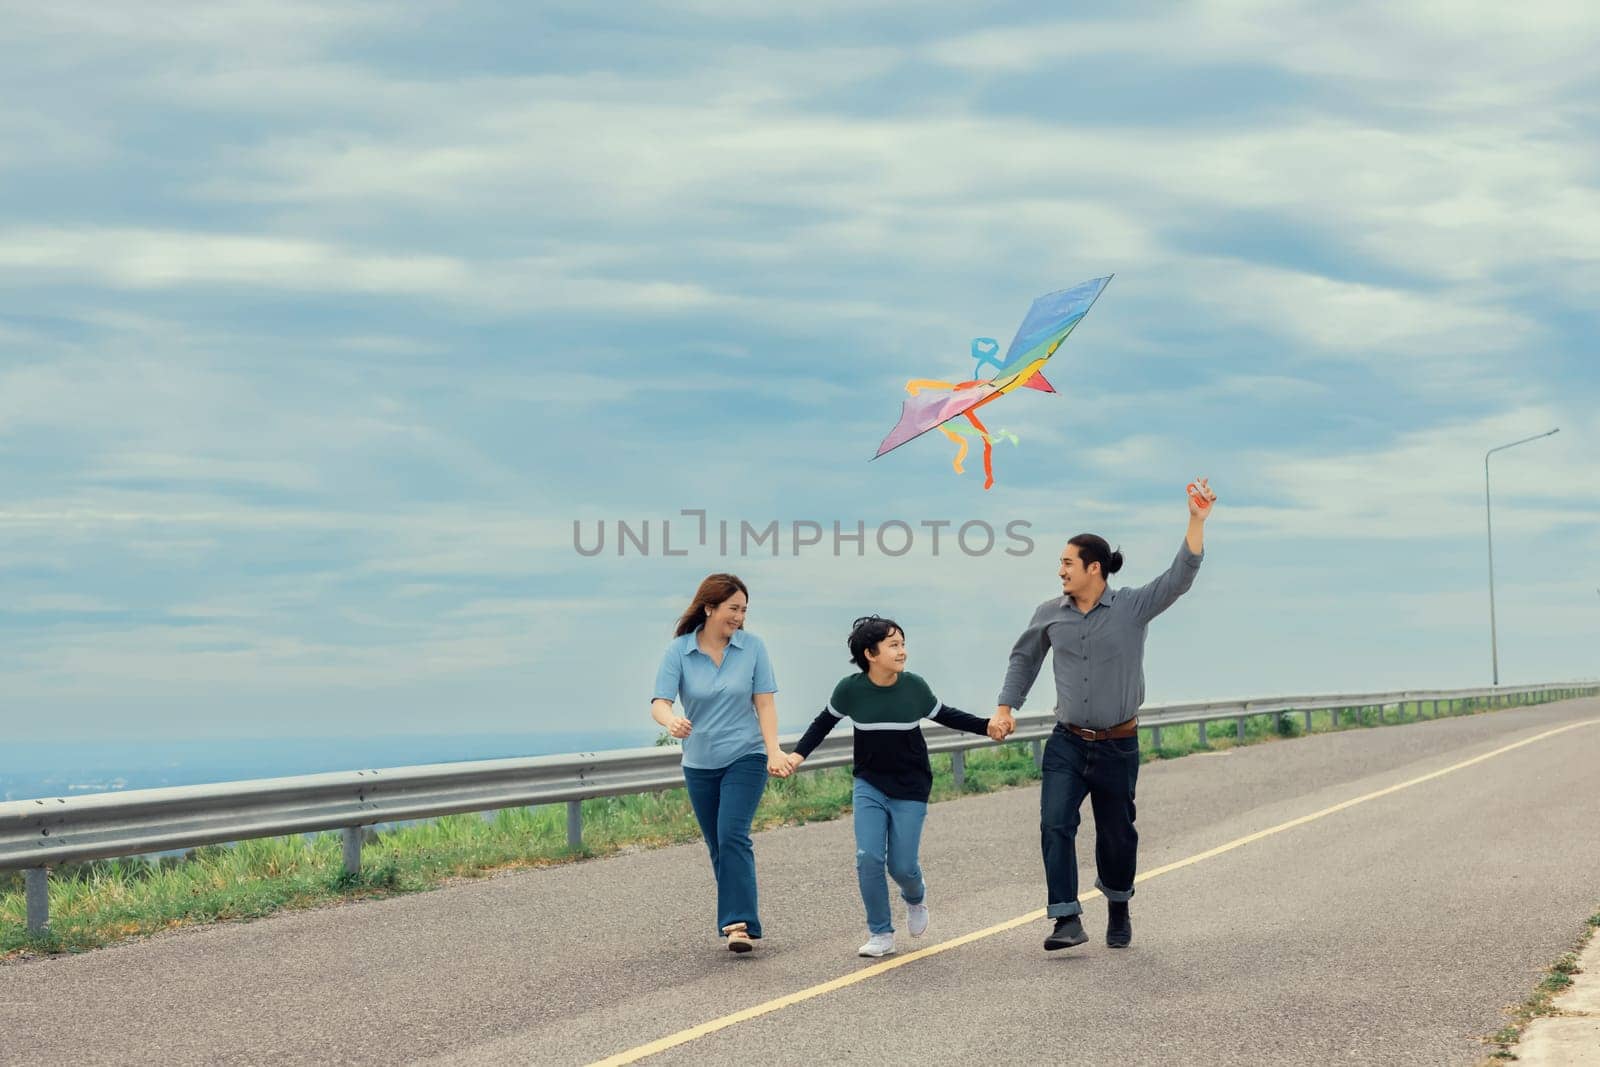 Progressive happy family vacation concept with outdoor flying kite on the road by biancoblue